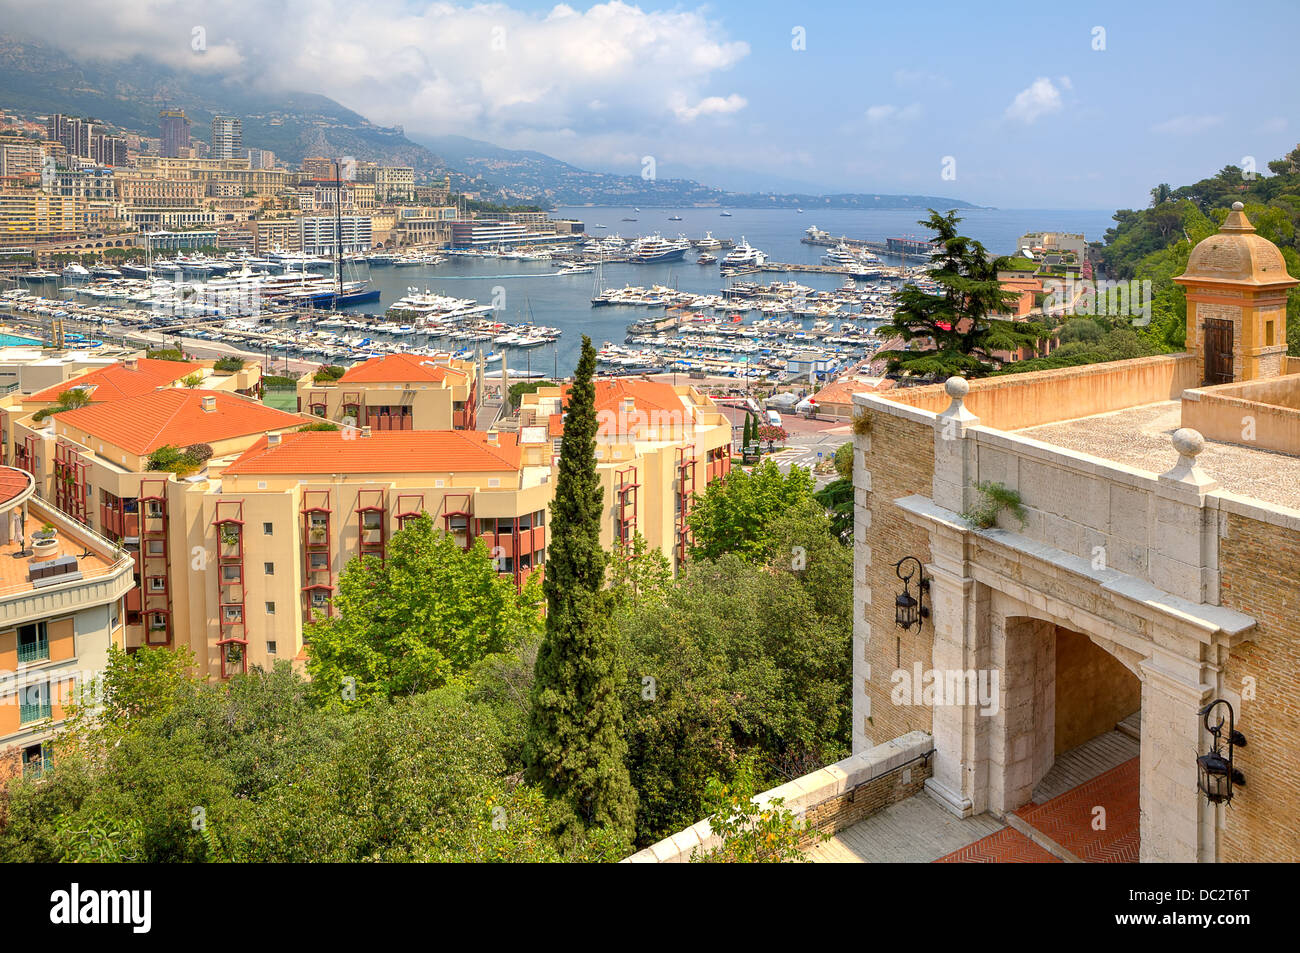 Beautiful view from ancient fortifications on port with yachts of Monte Carlo and residential buildings in Monaco. Stock Photo